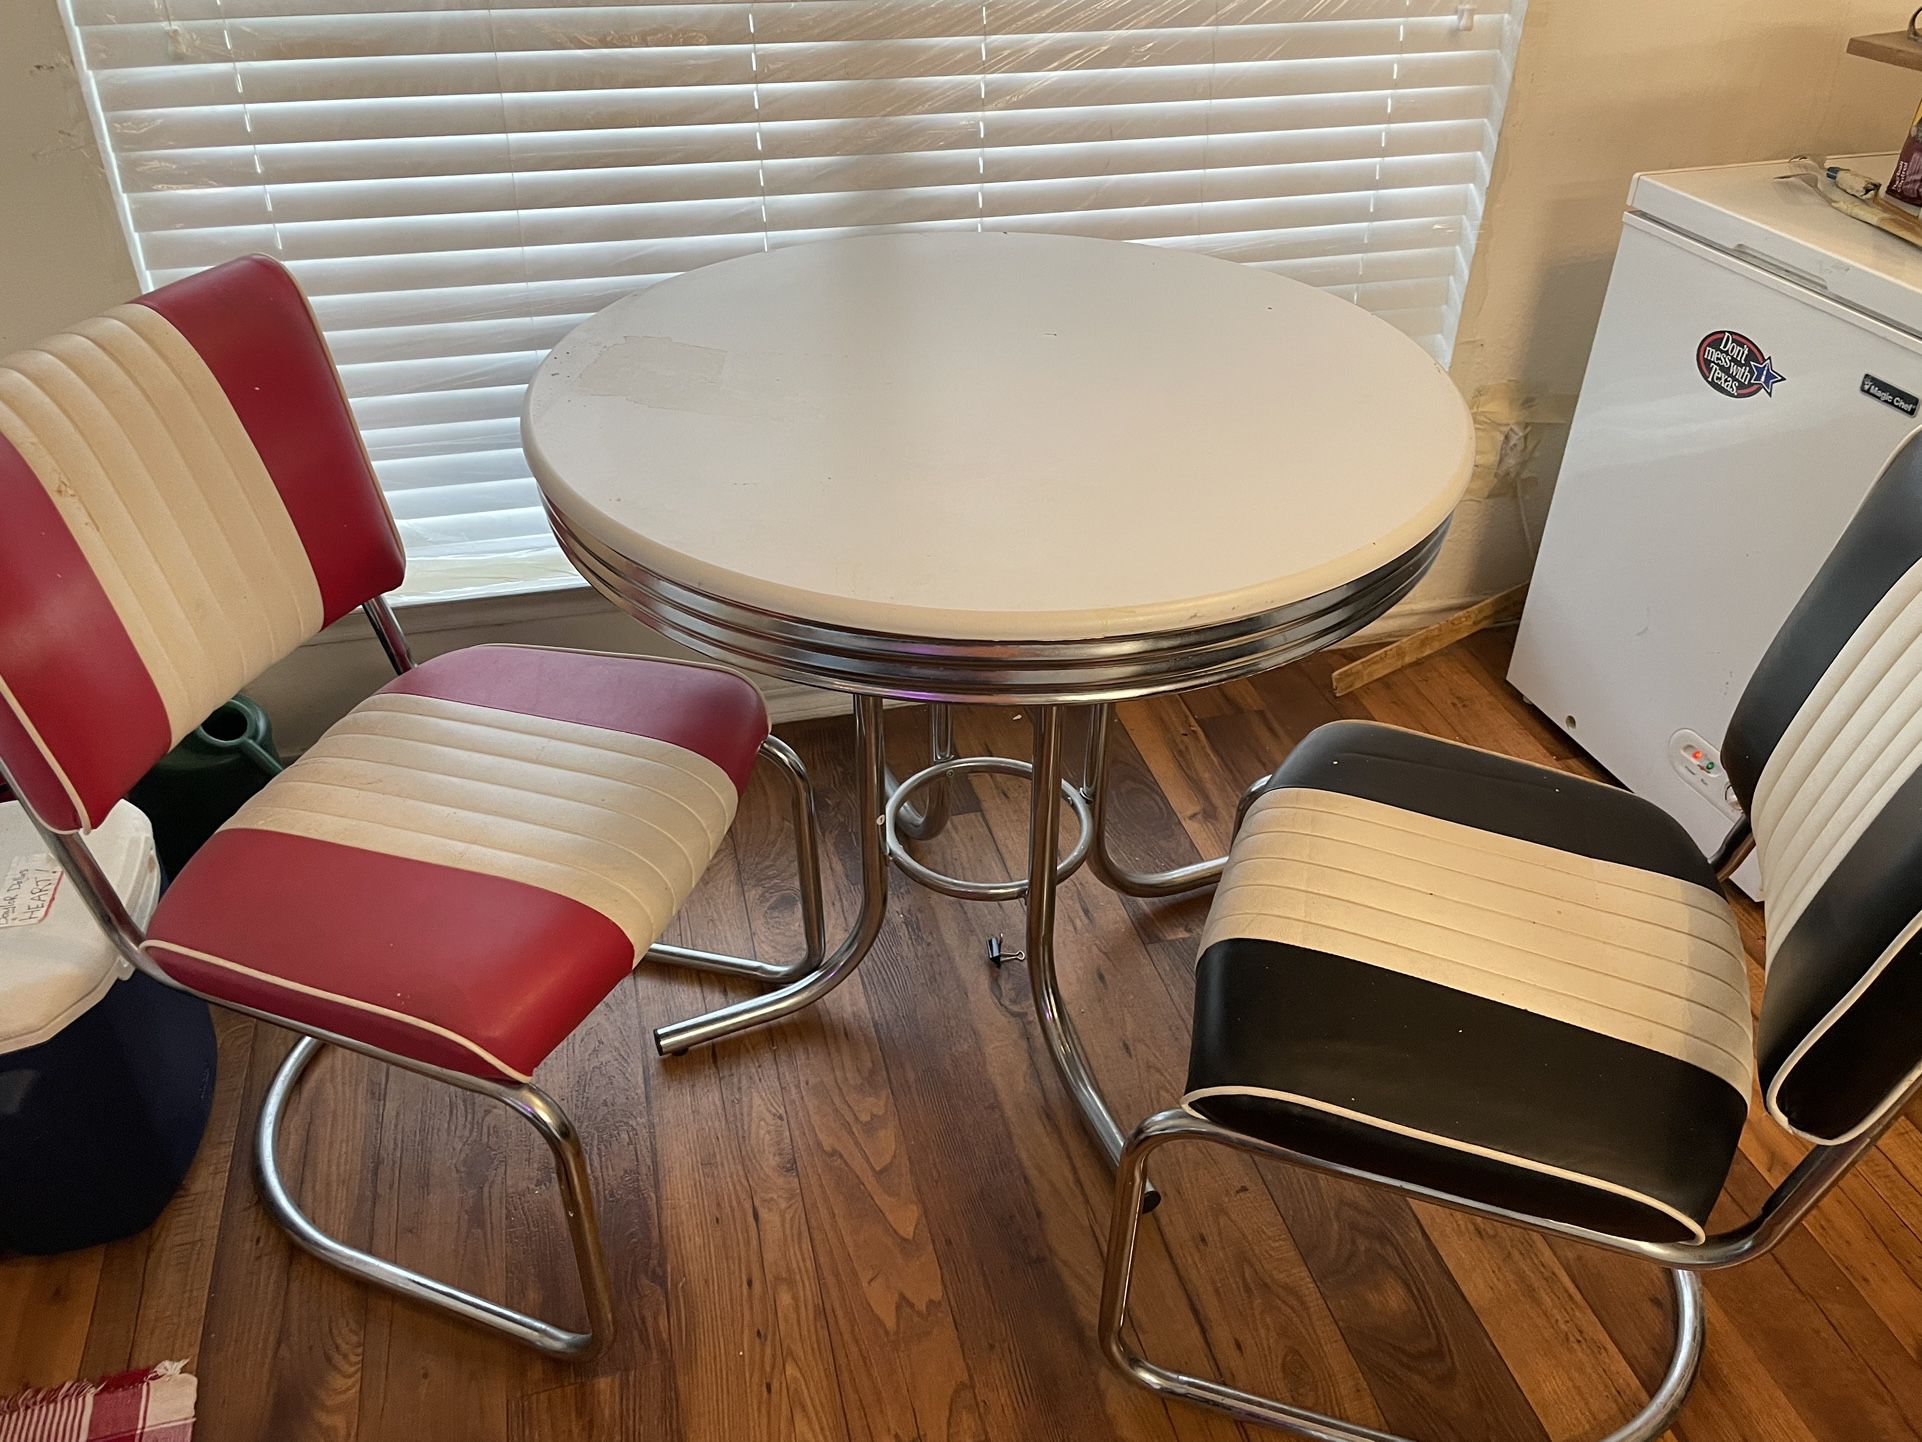 50s Style Table And Chairs $75